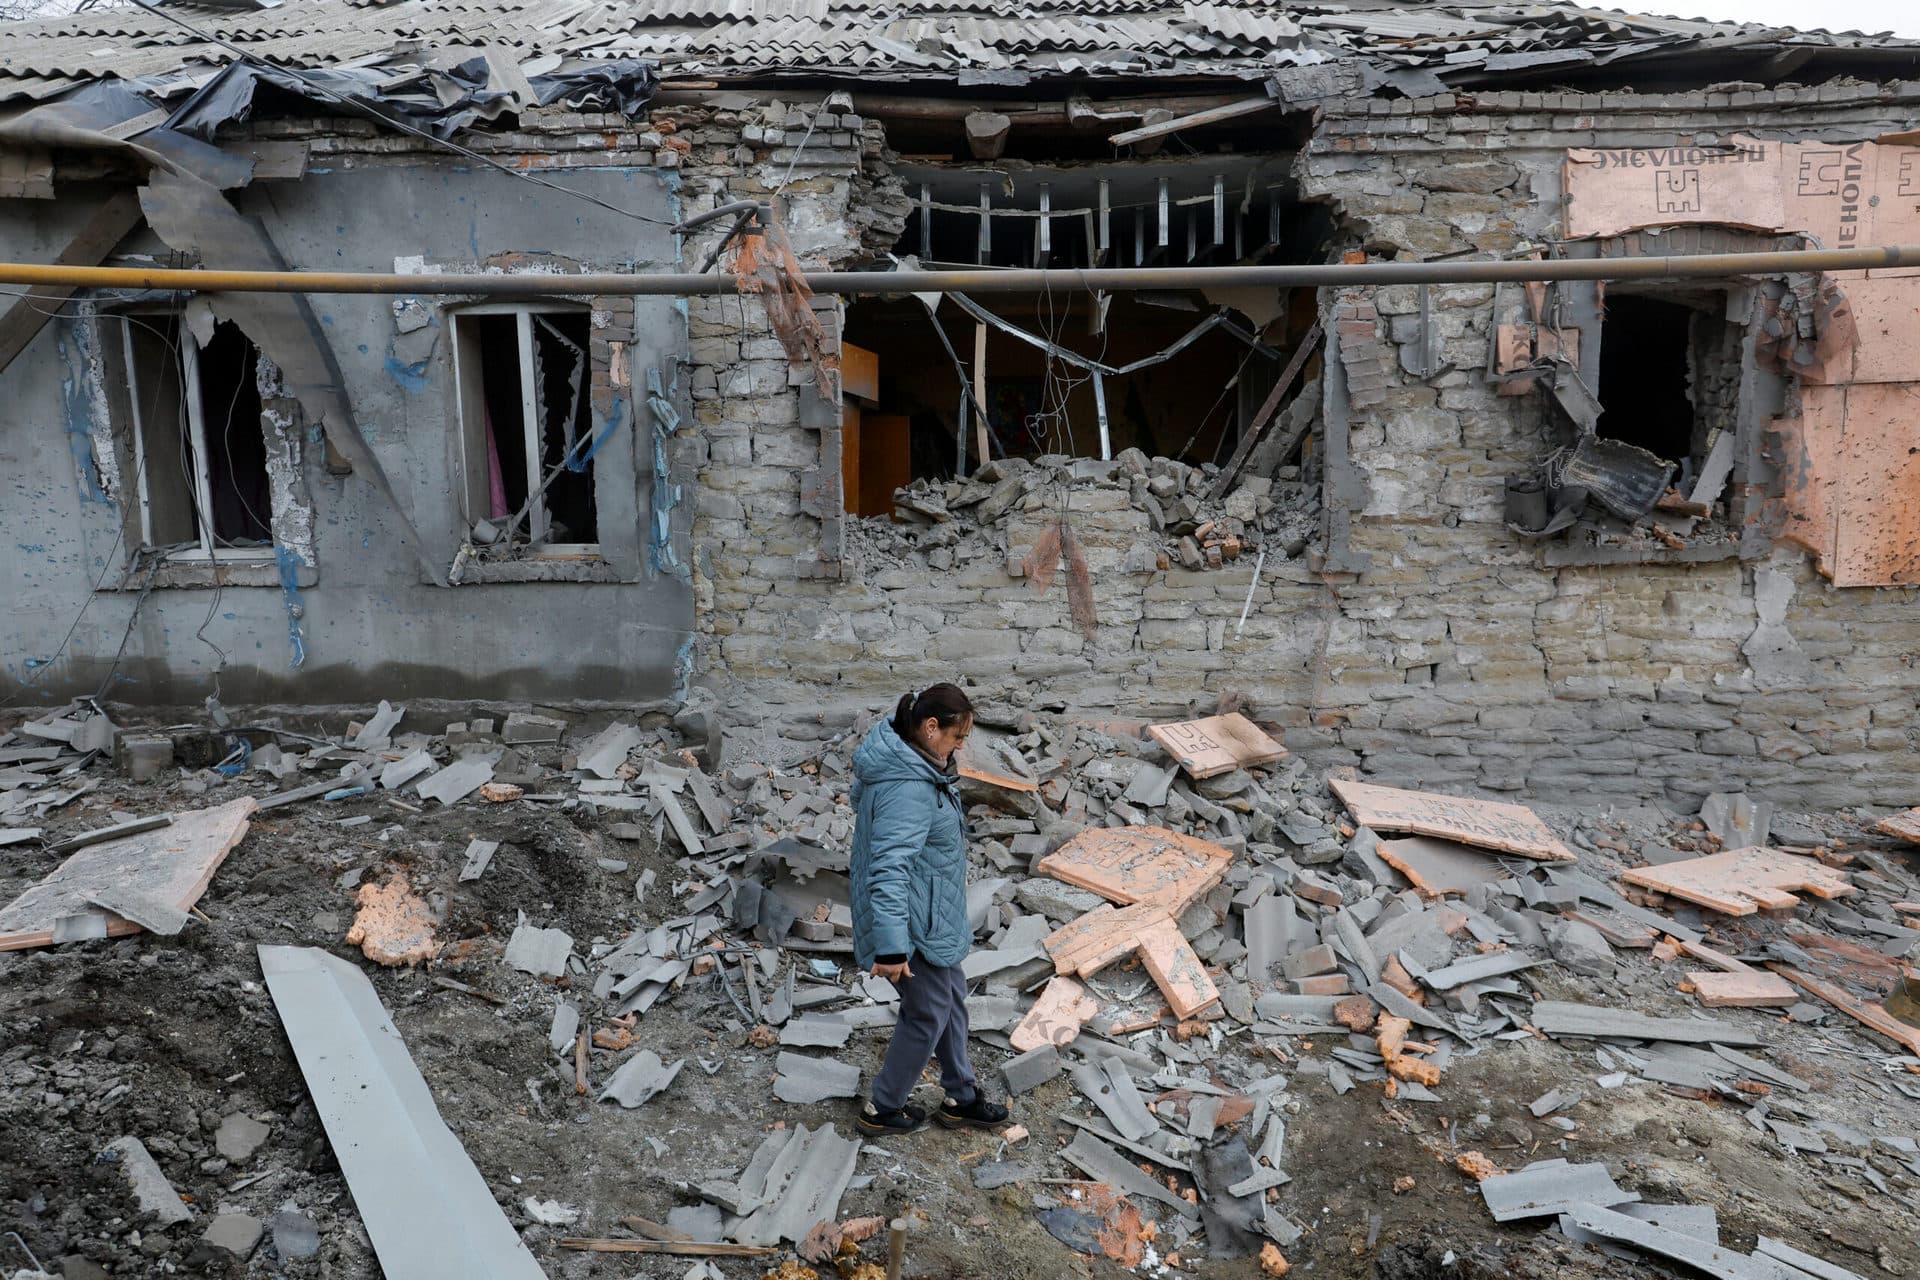 A woman walks past a house destroyed by recent shelling during the Russia-Ukraine conflict in Donetsk